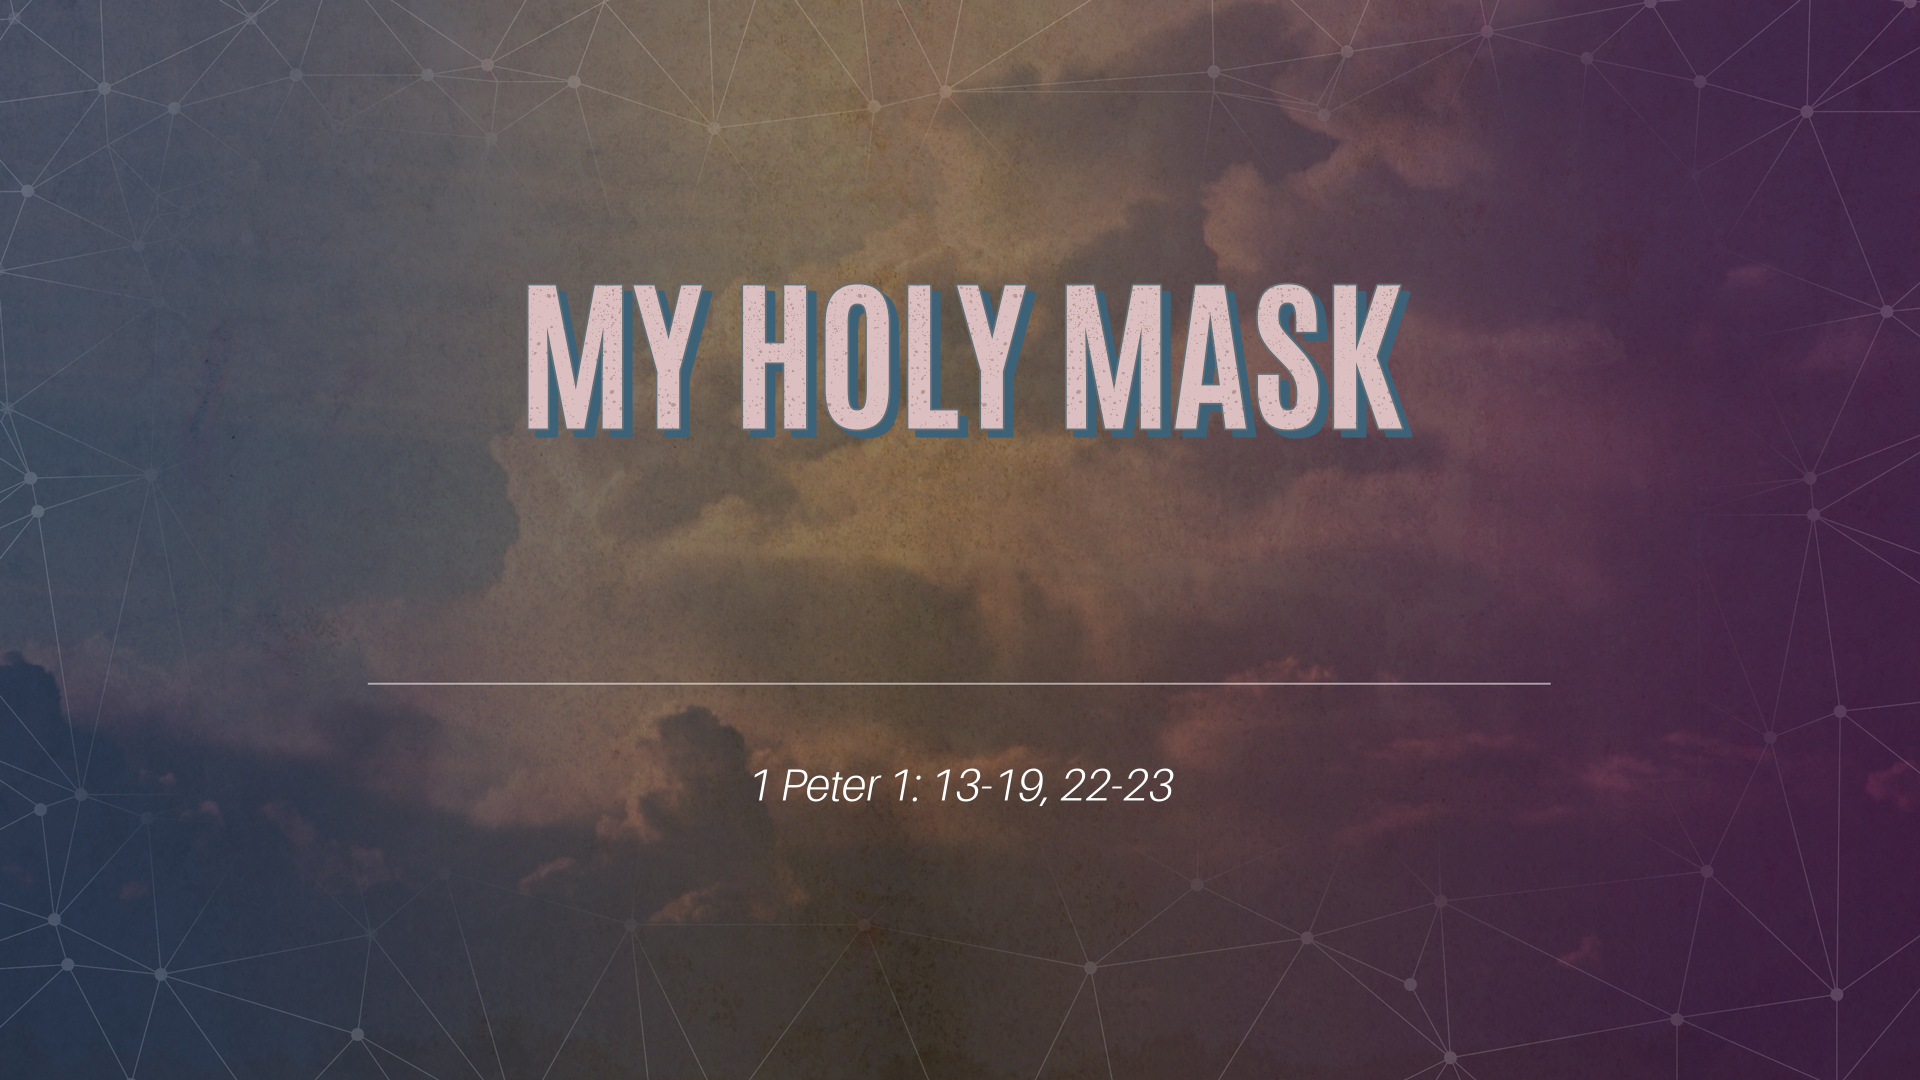 Nov 6, 2022 - My Holy Mask (Video) - 1 Peter 1: 13-19, 22-23